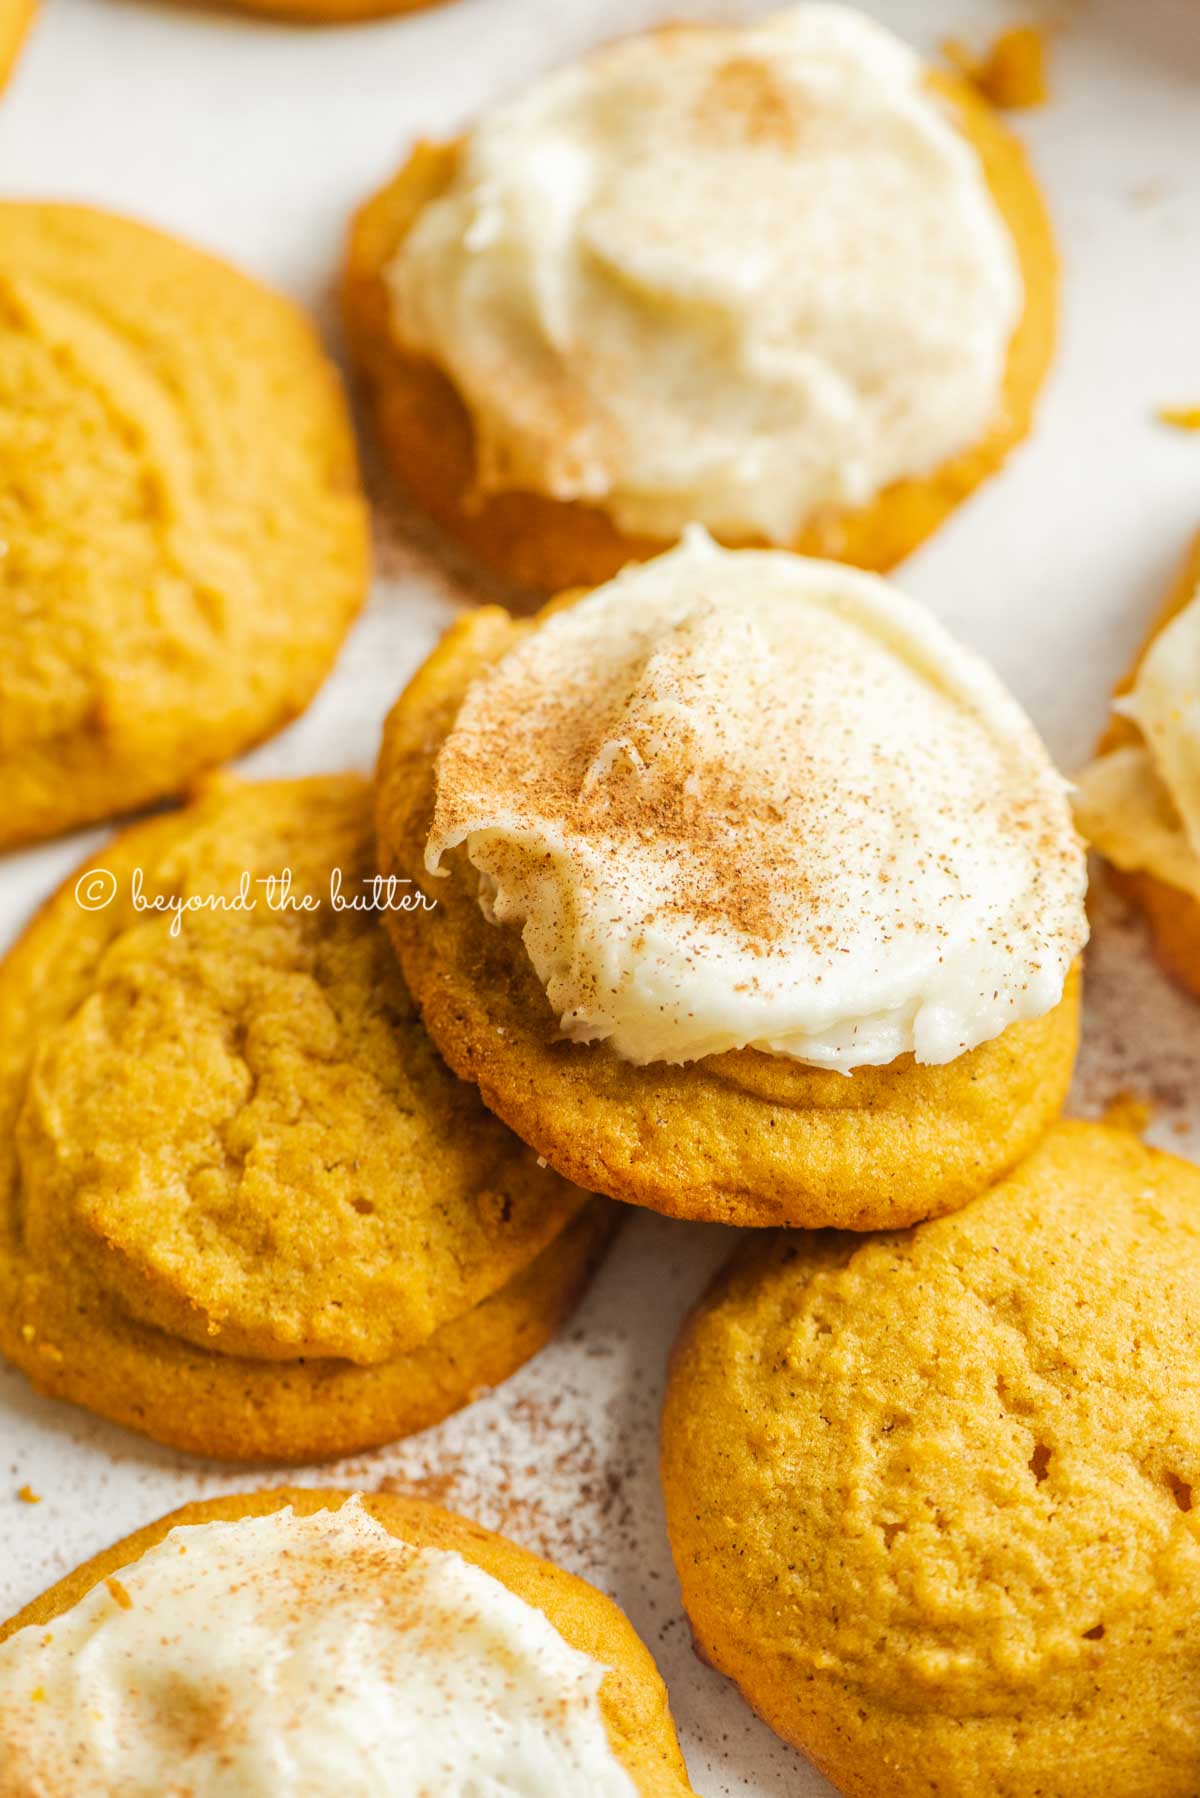 Plain and cream cheese frosted pumpkin cinnamon cookies dusted with cinnamon sugar and pumpkin pie spice on a white background | All Images © Beyond the Butter™